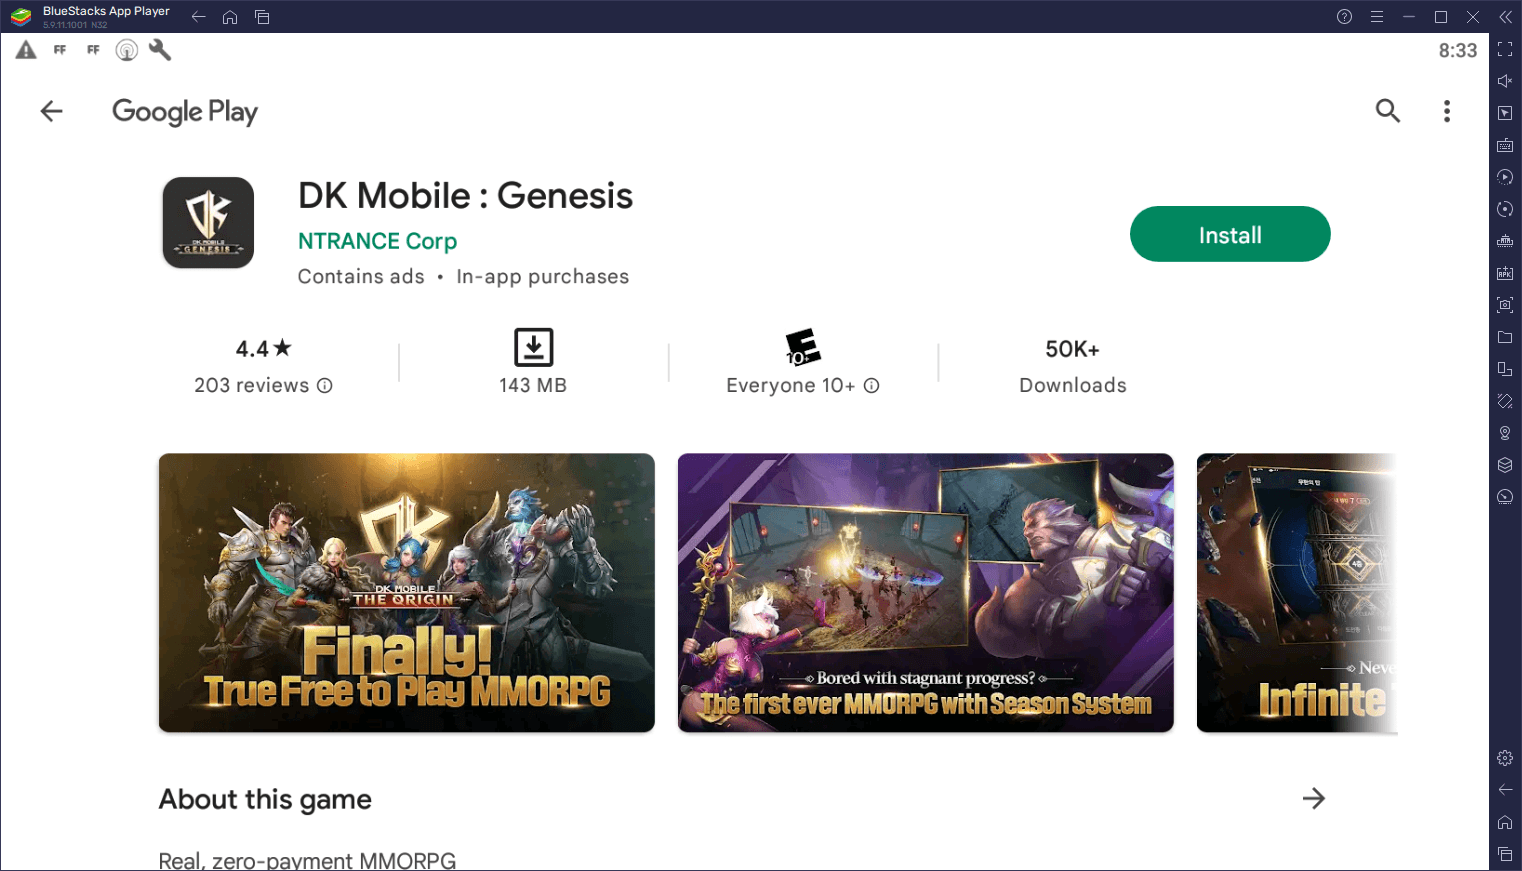 How to Play DK Mobile: Genesis on PC with BlueStacks